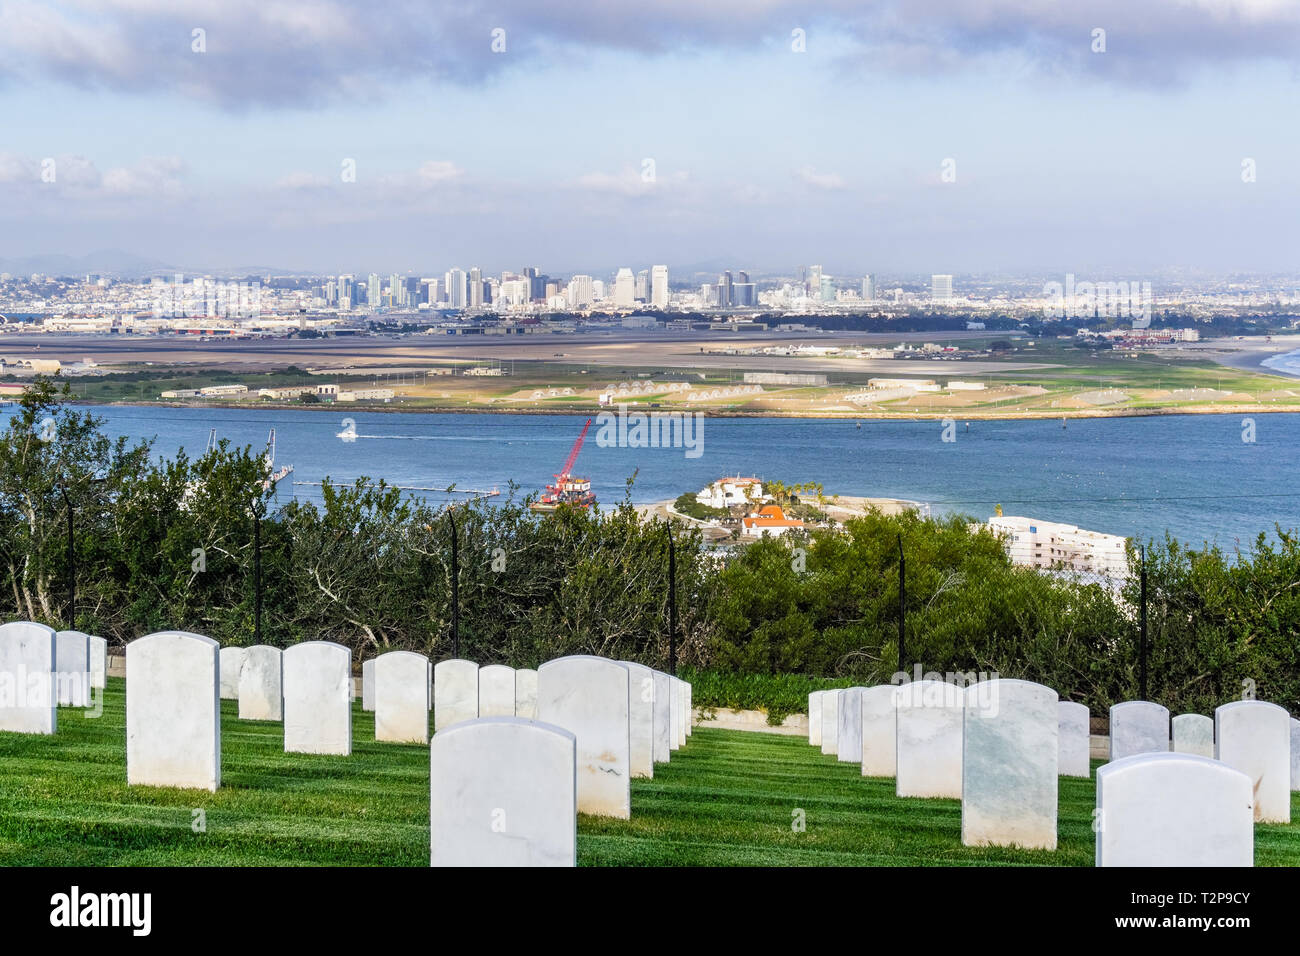 Military cemetery; San Diego's skyline in the background, California Stock Photo